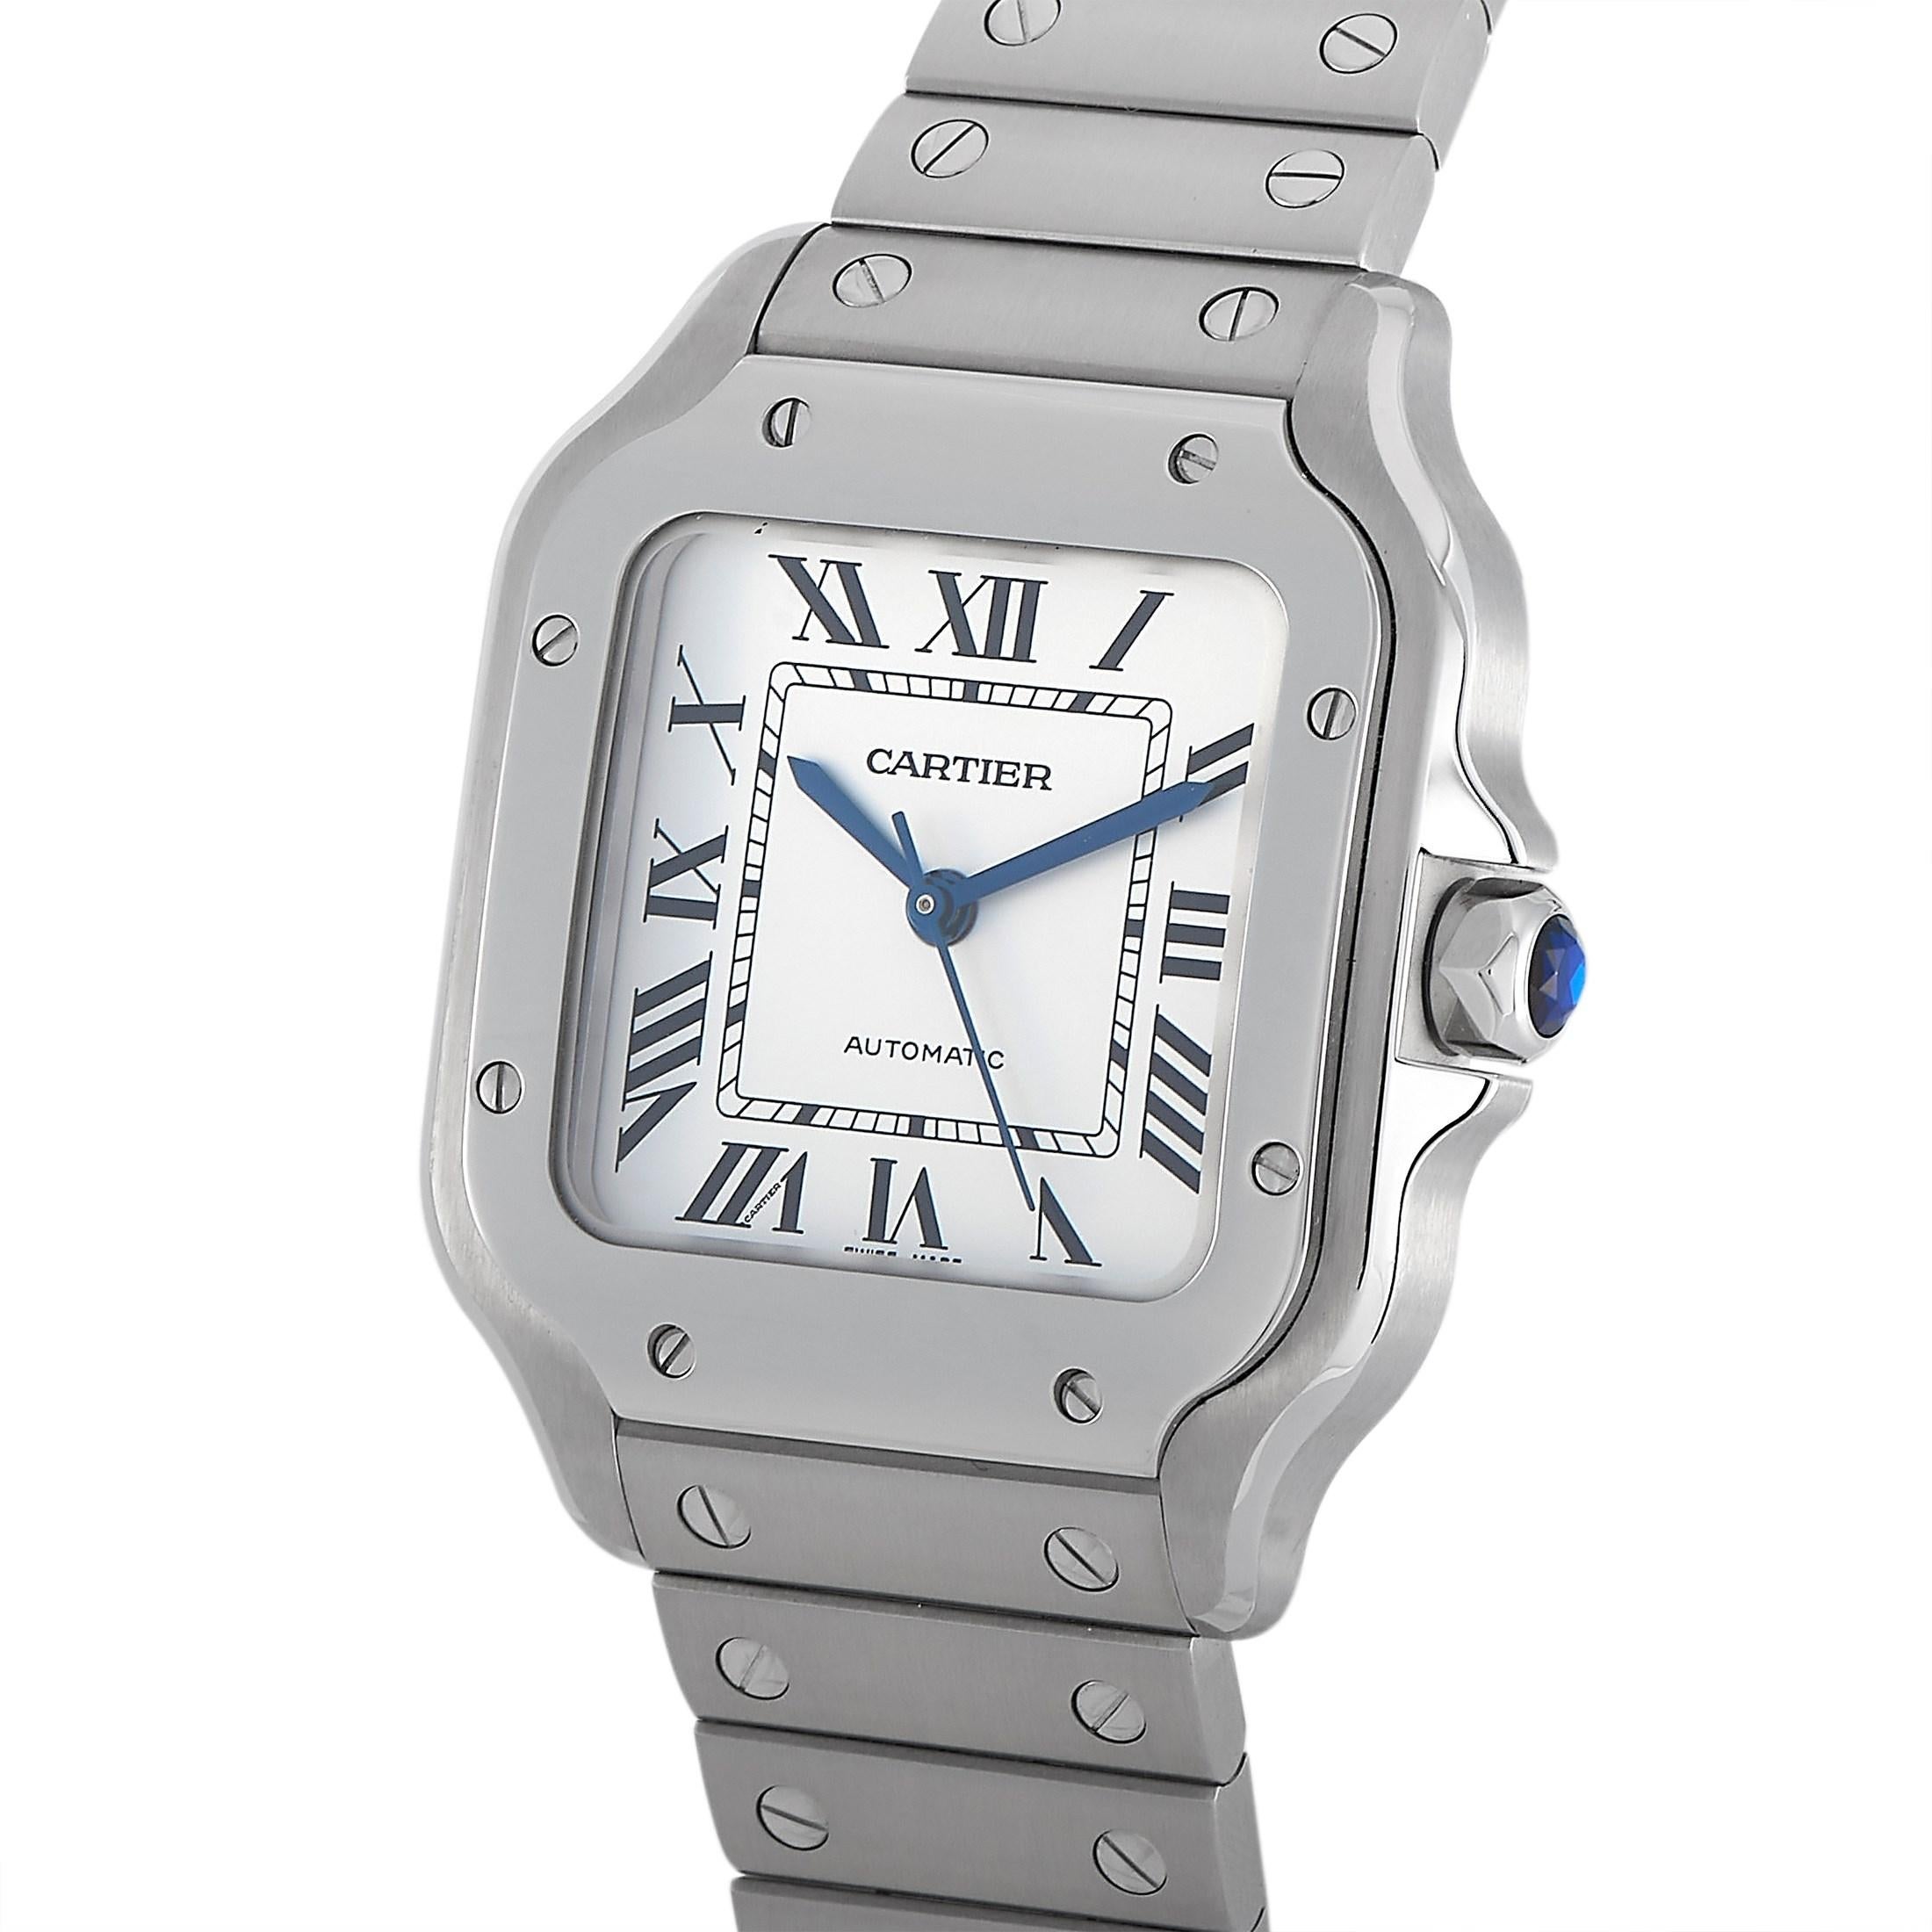 Cartier Santos De Cartier Watch WSSA0029, was originally designed for the famous Brazilian aviator Alberto Santos Dumont. 

This iconic timepiece features a 35mm square case and bracelet crafted from shimmering stainless steel. On the silvered